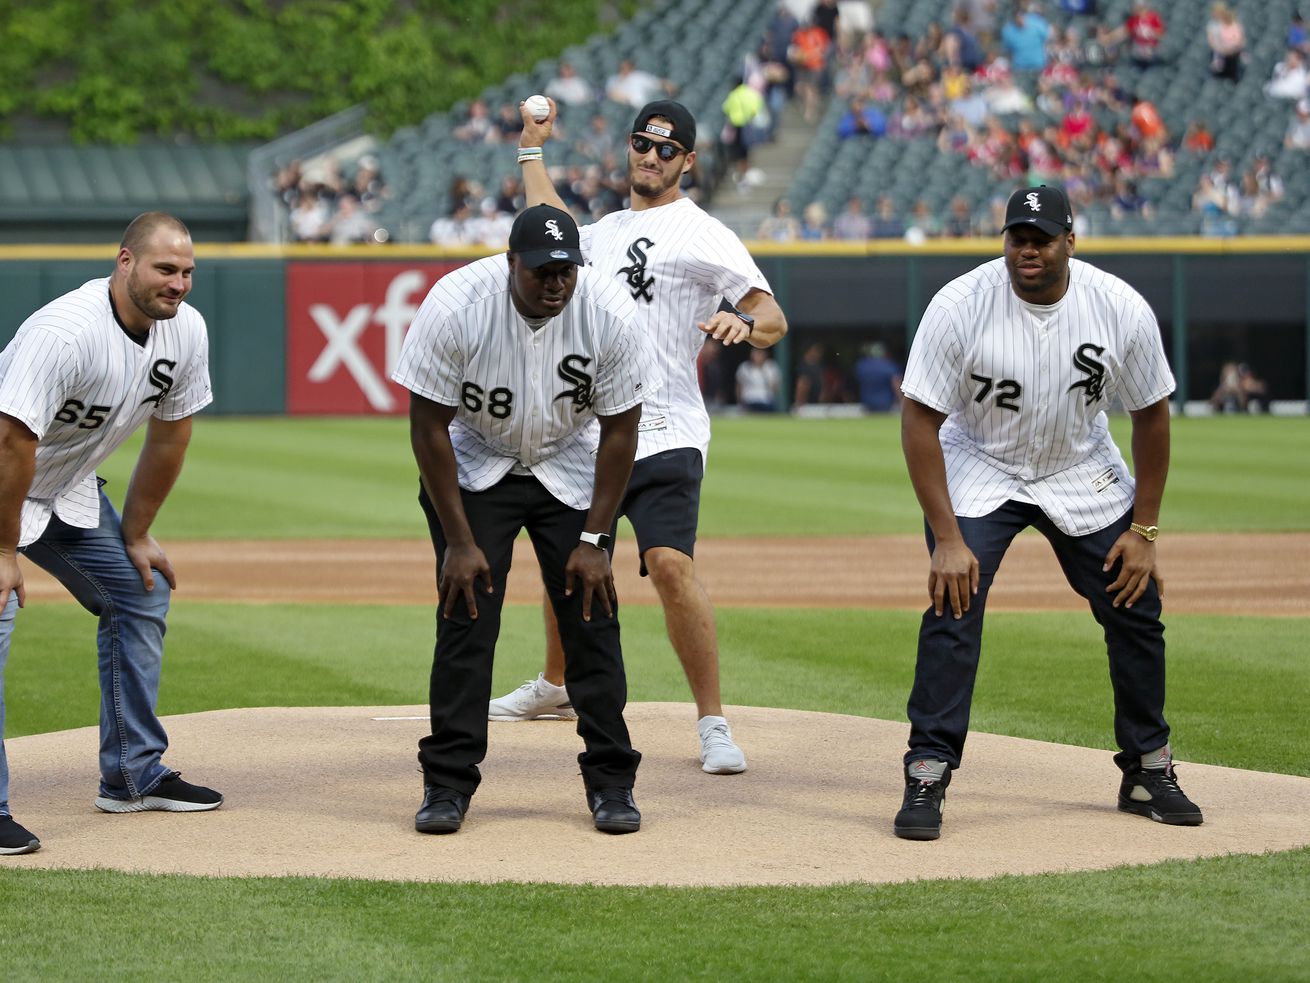 Bears quarterback Mitch Trubisky throws the ceremonial first pitch behind teammates Cody Whitehair, James Daniels, and Charles Leno Jr., before the game against the Cleveland Indians at Guaranteed Rate Field on Friday.